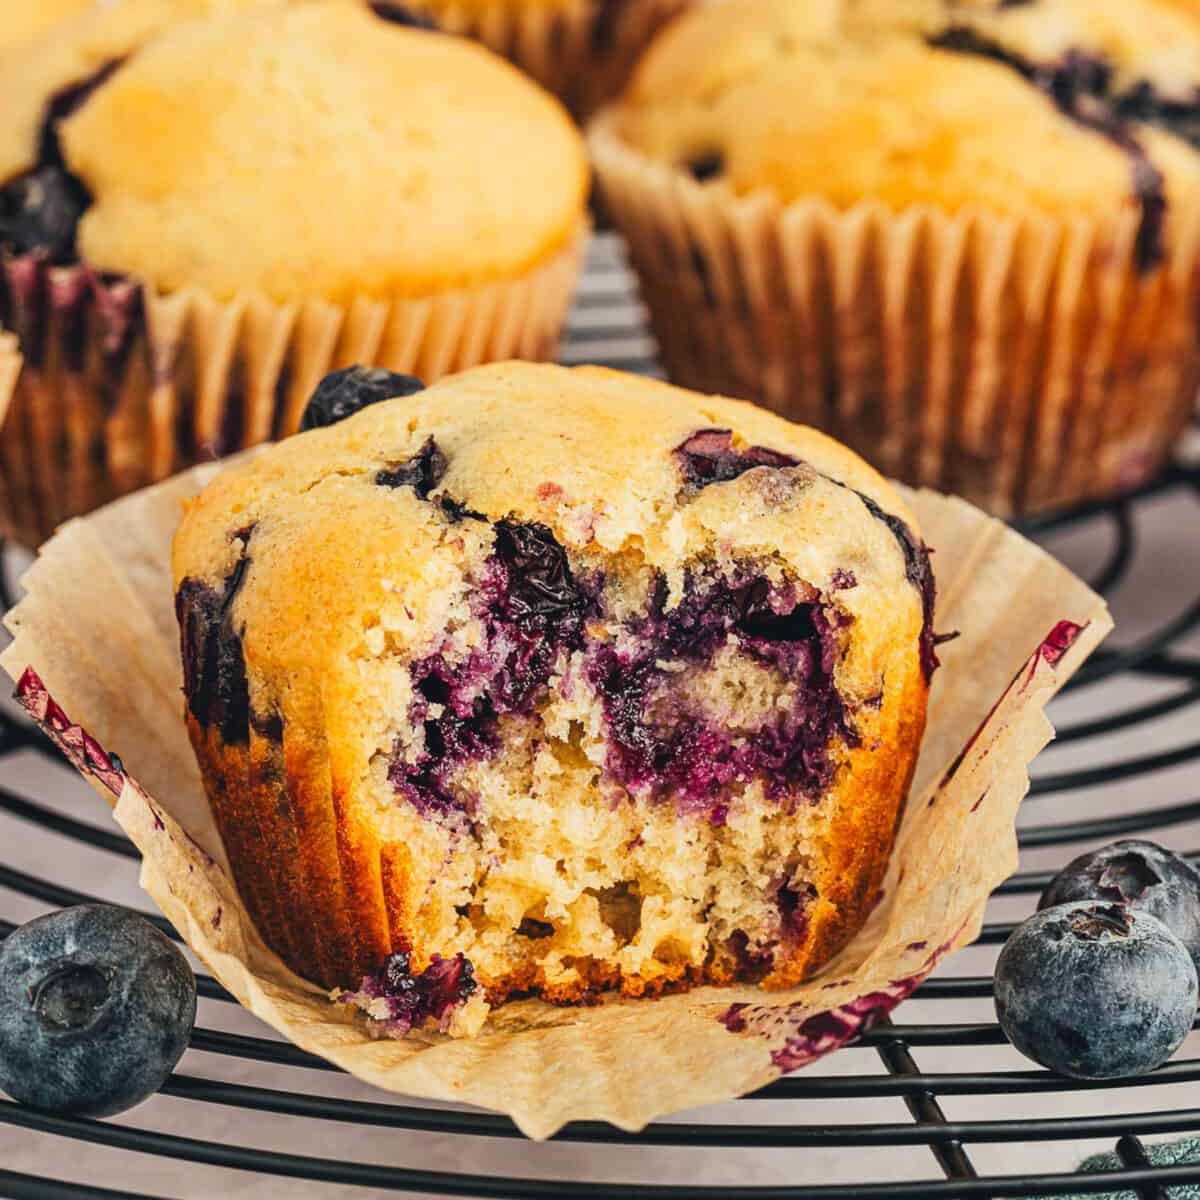 Bueberry muffin with a bite taken out of it sitting on a cooling rack.